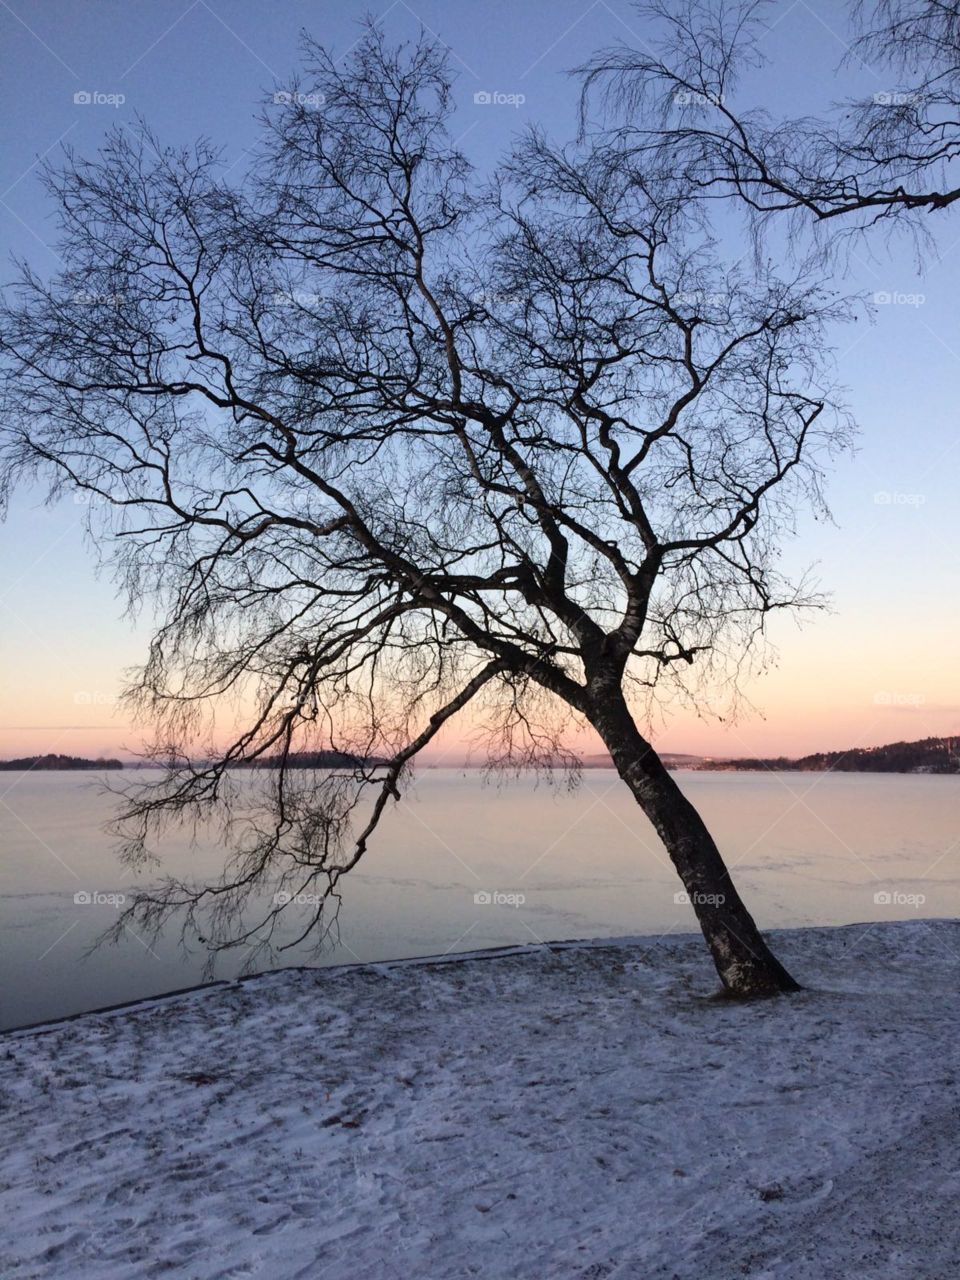 A Frozen Tree on a wintery morning and a Frozen lake